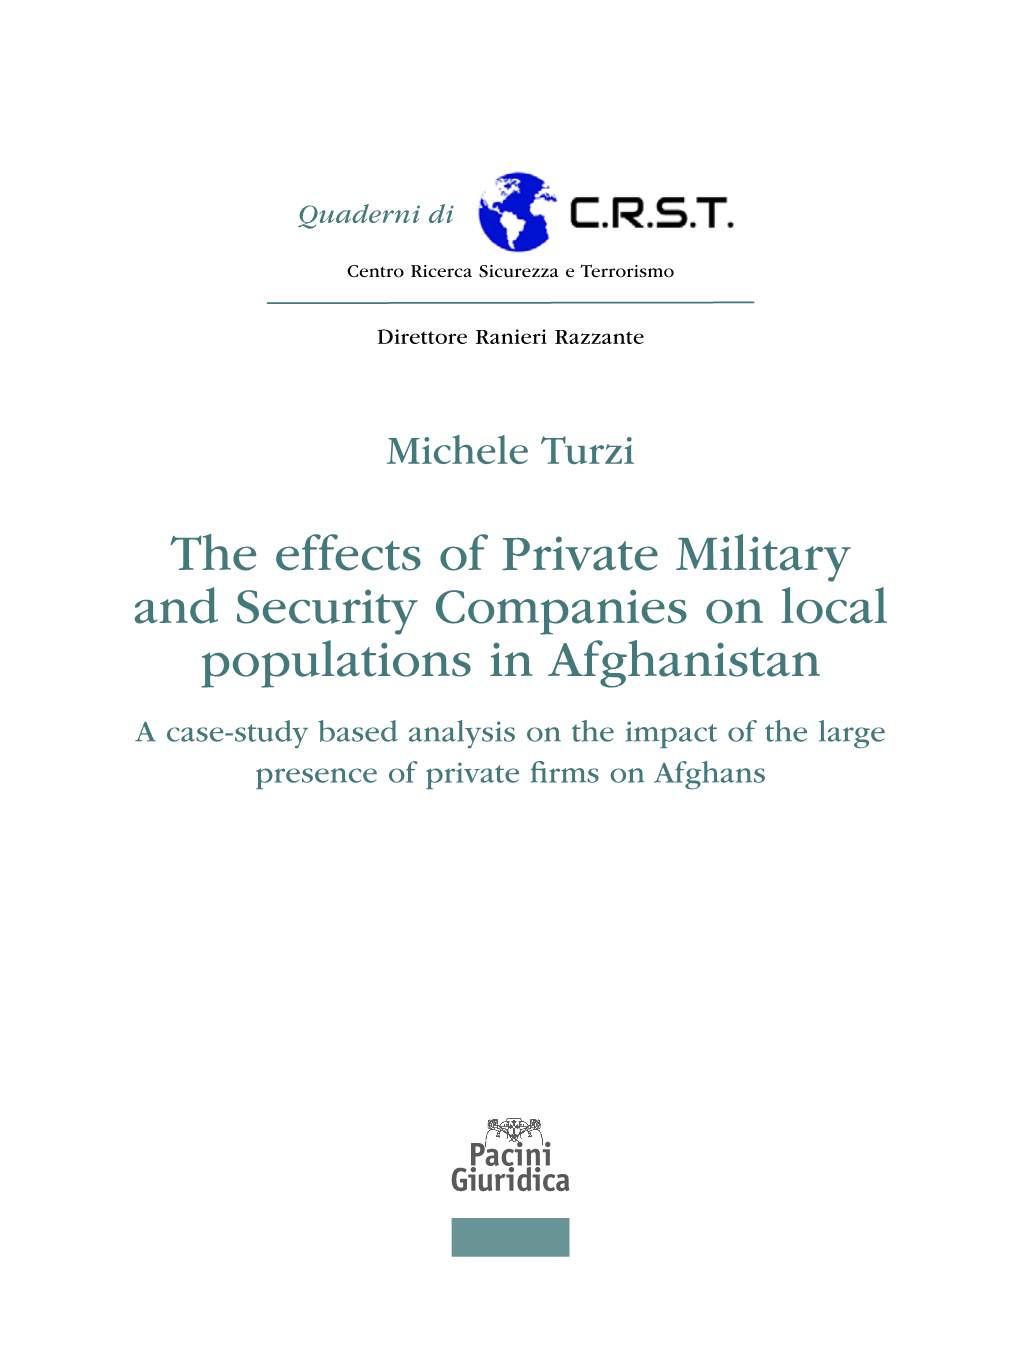 The Effects of Private Military and Security Companies on Local